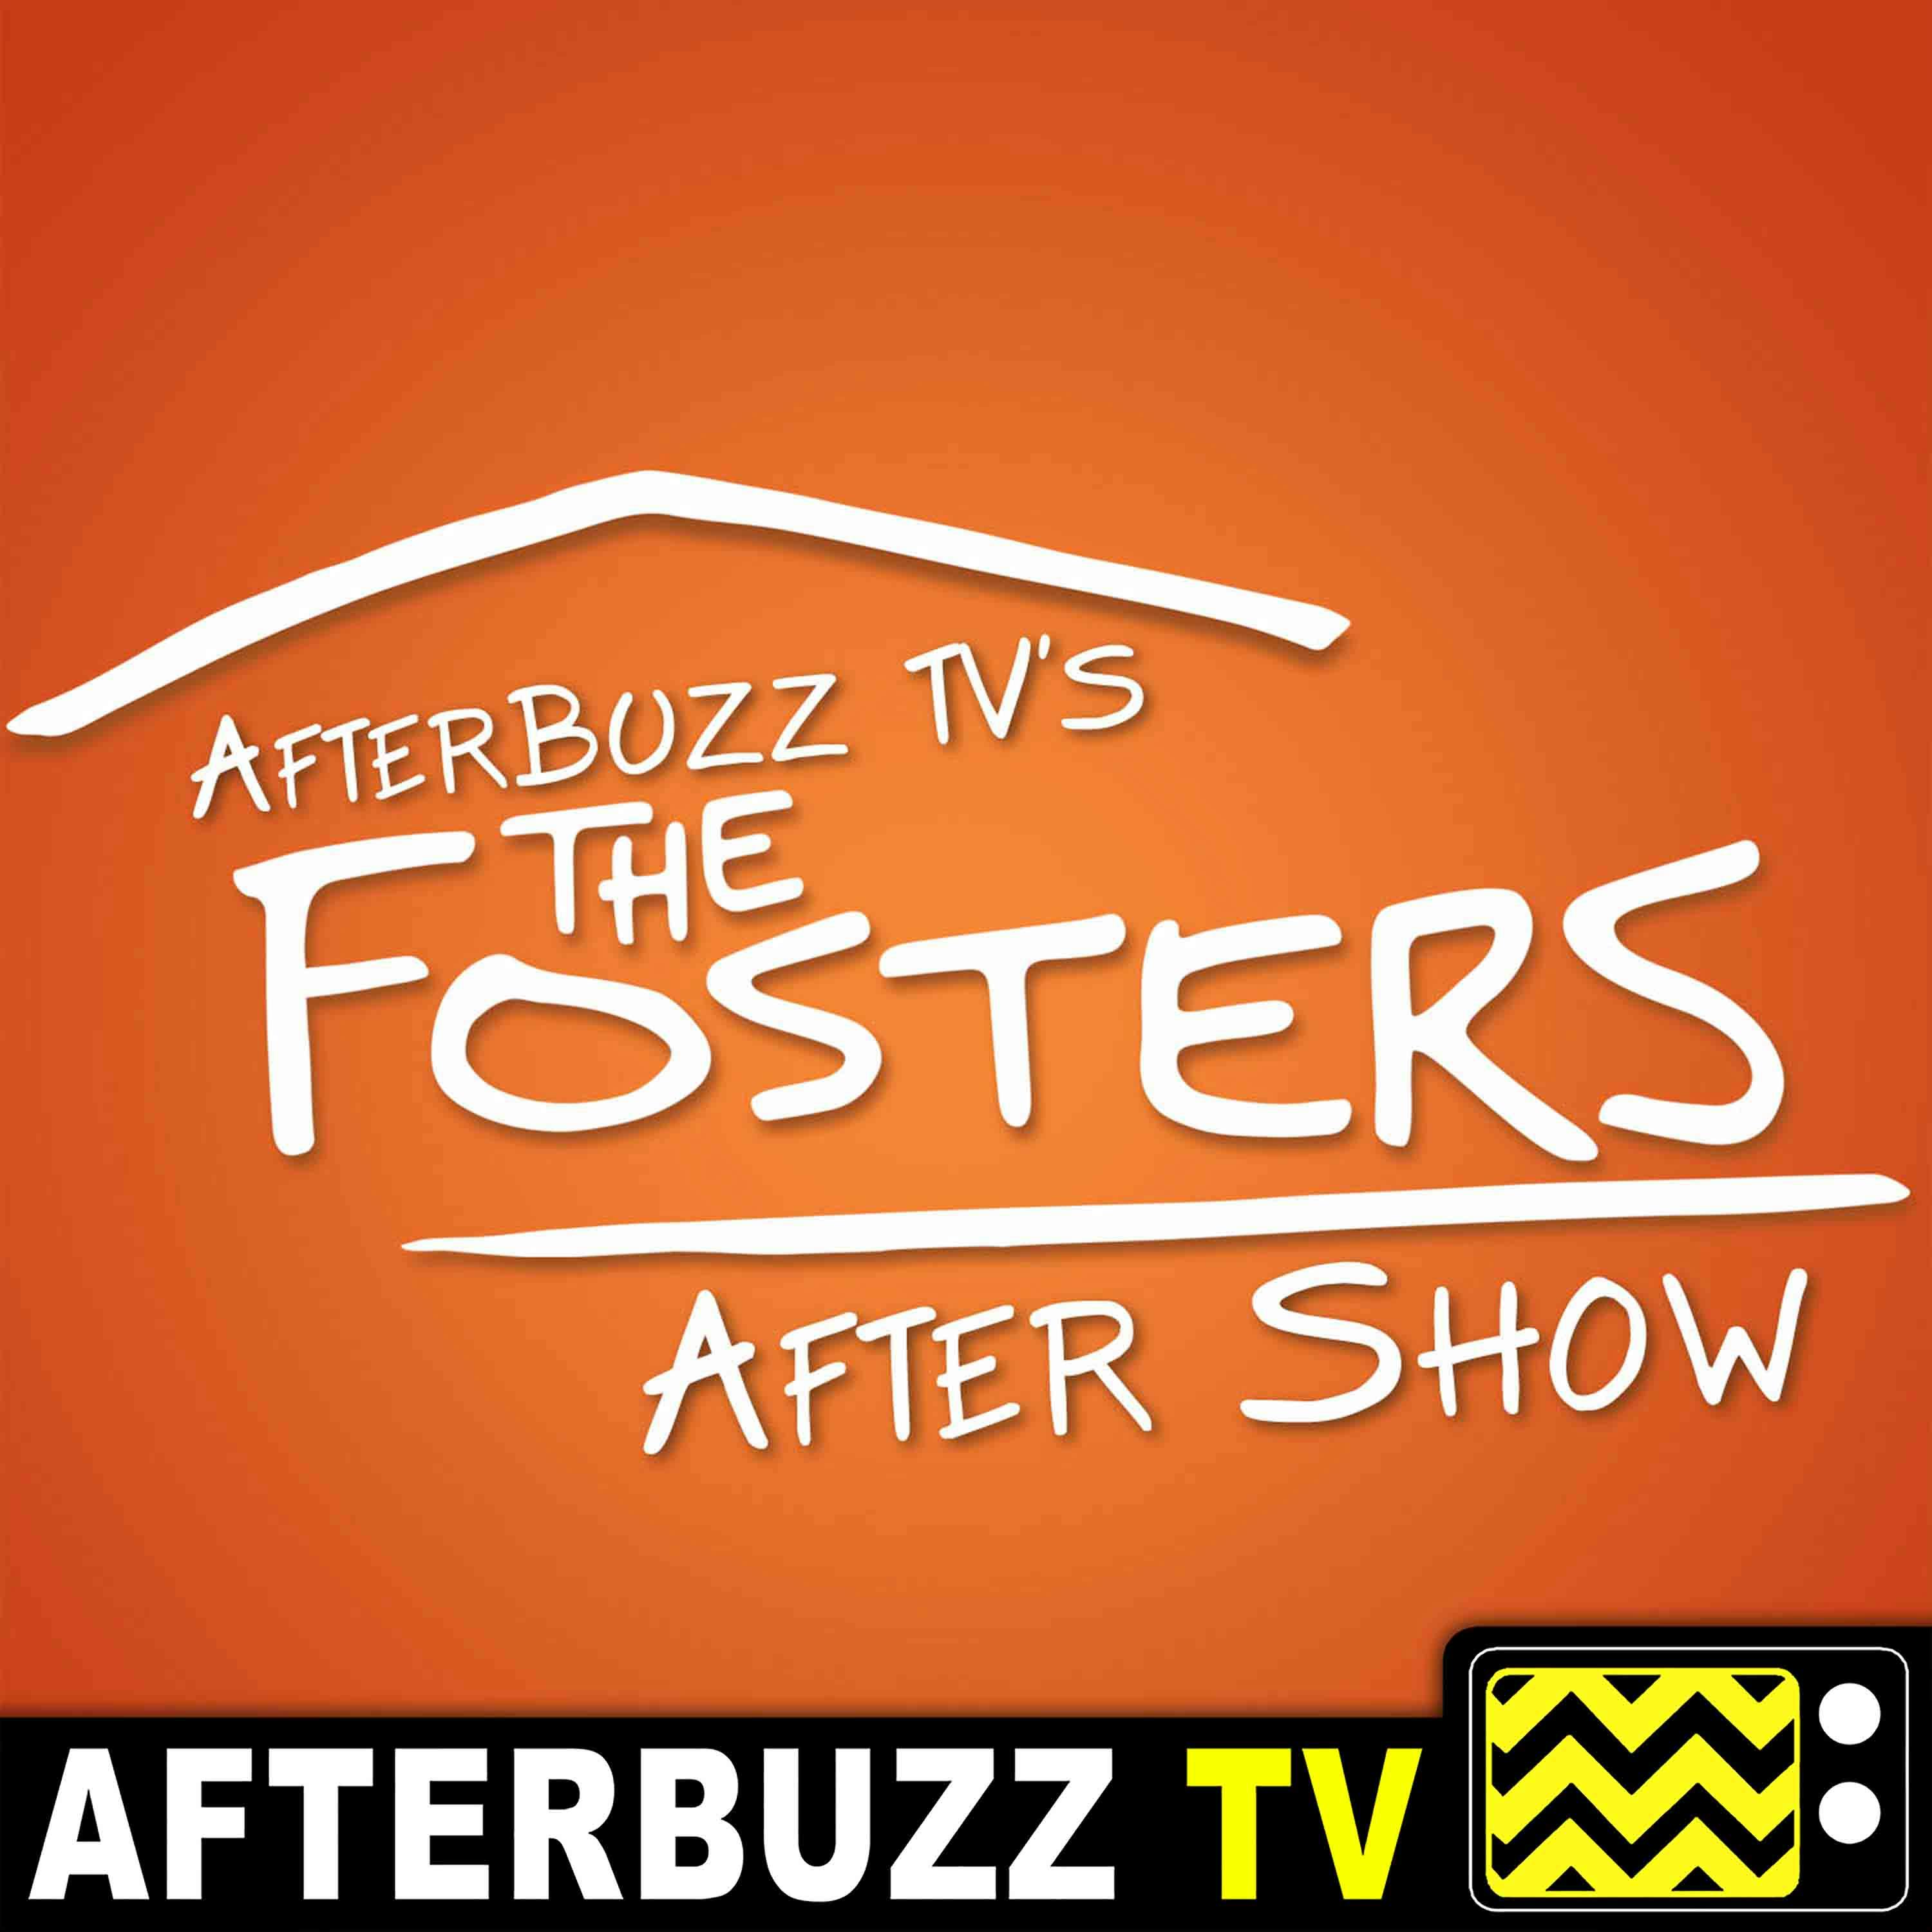 The Fosters S:5 | Too Fast, Too Furious E:4 | AfterBuzz TV AfterShow